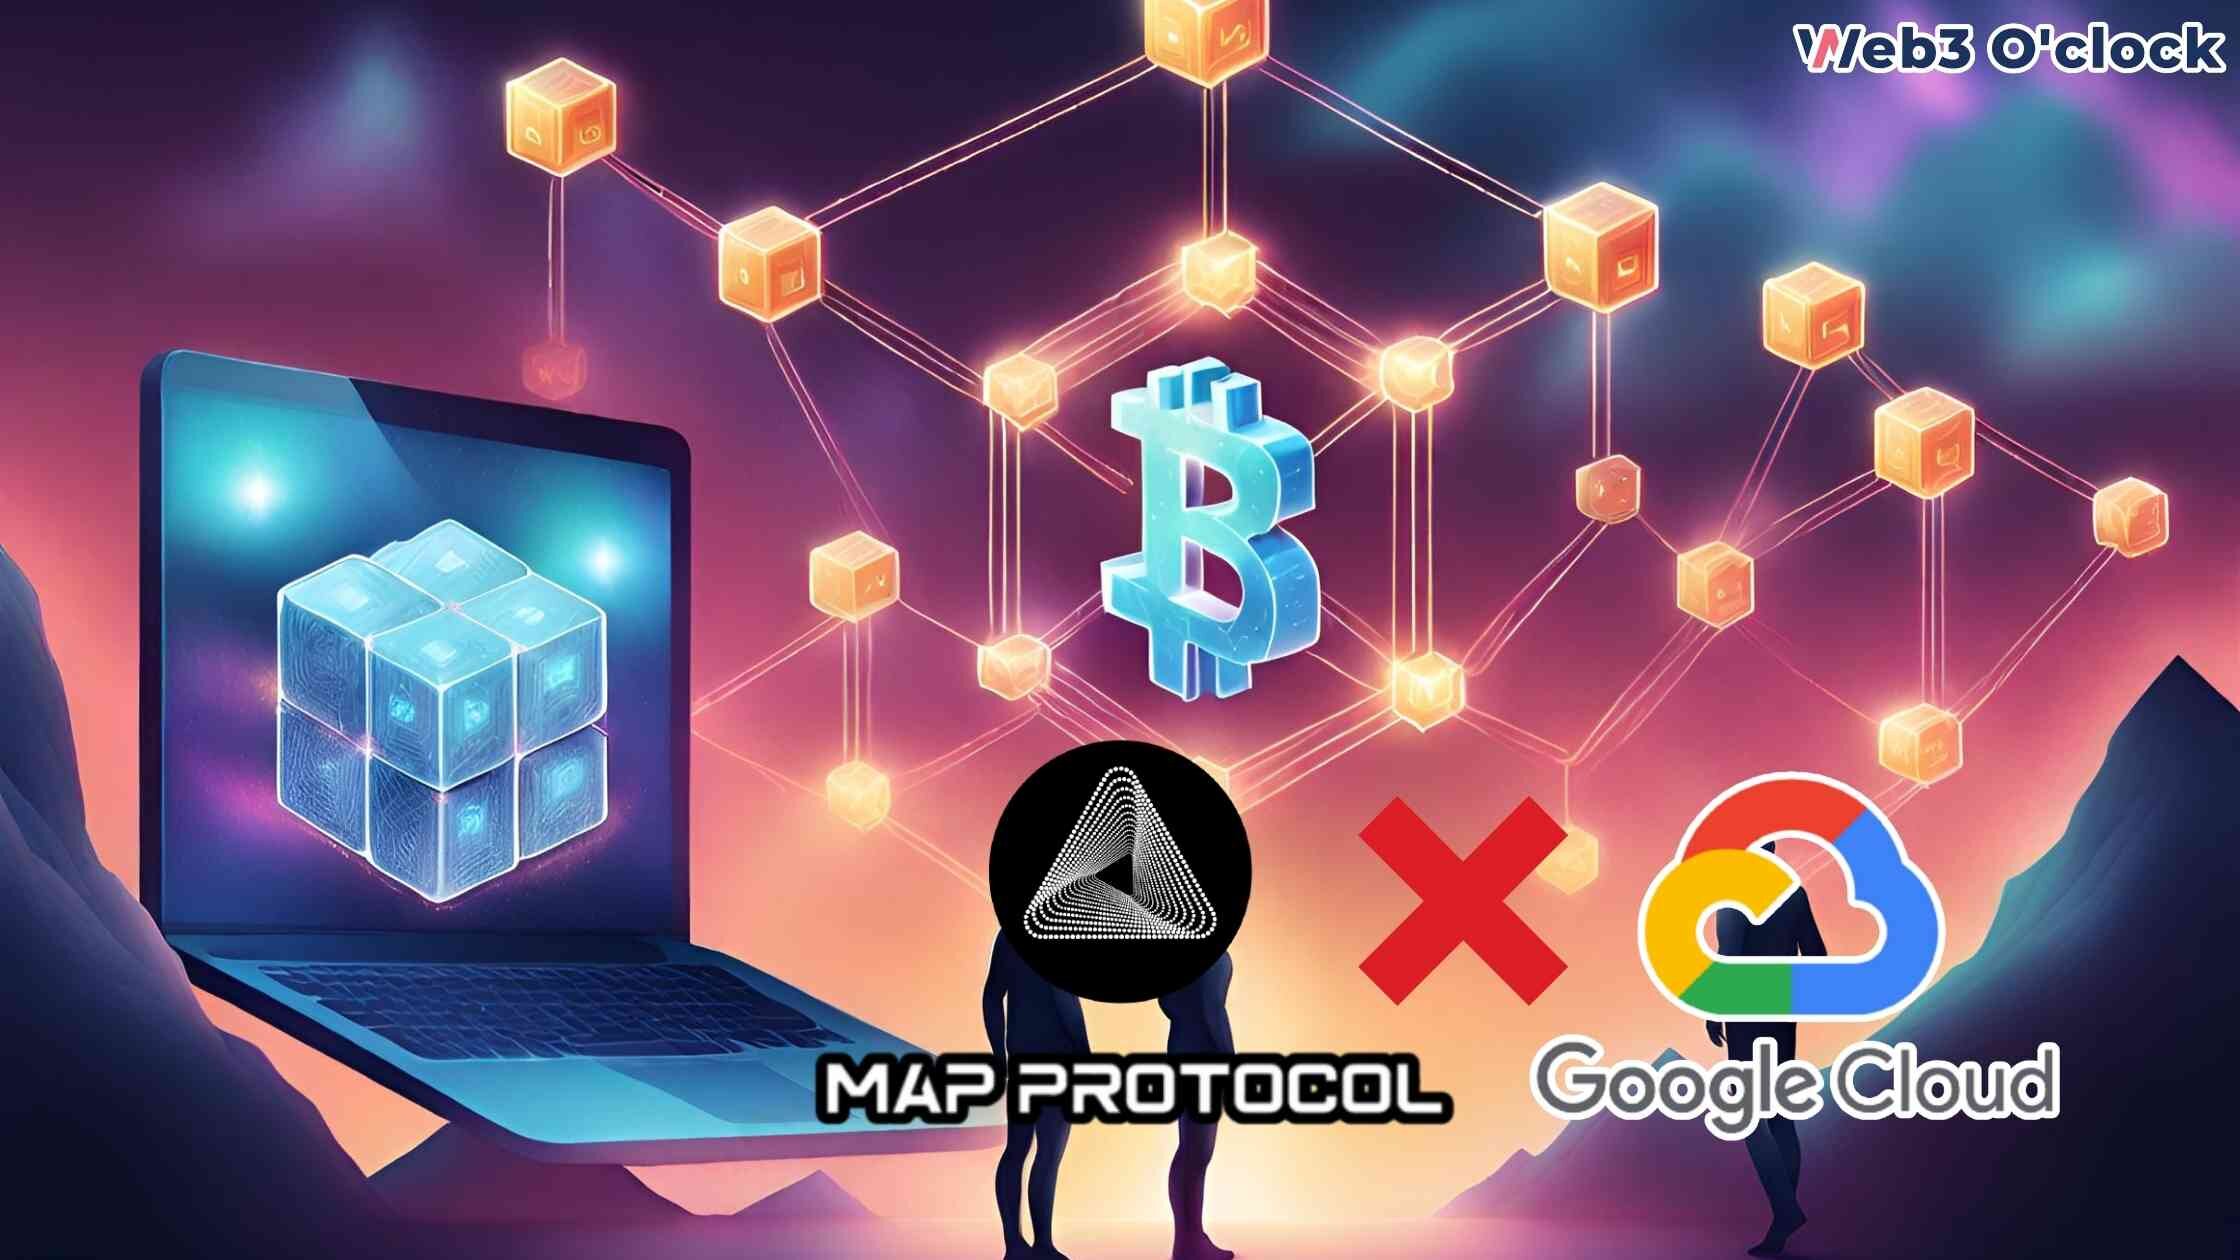 Google Cloud and MAP Protocol Join Forces BY web3o'clock